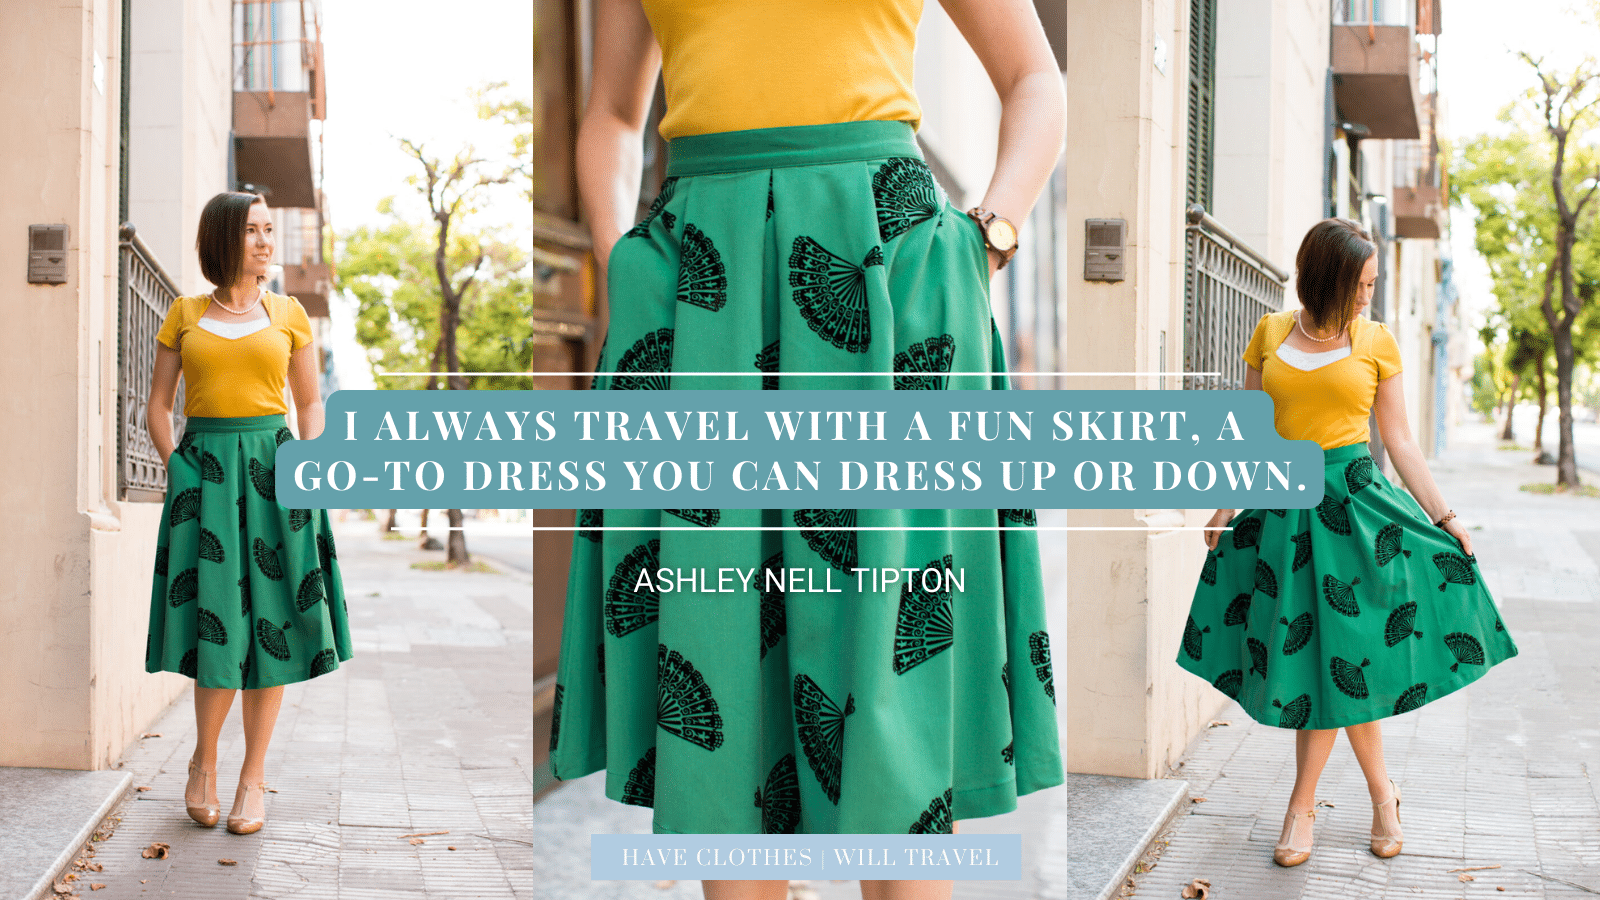 99. I always travel with a fun skirt, a go-to dress you can dress up or down; walking heels & flats are a must. - Ashley Nell Tipton